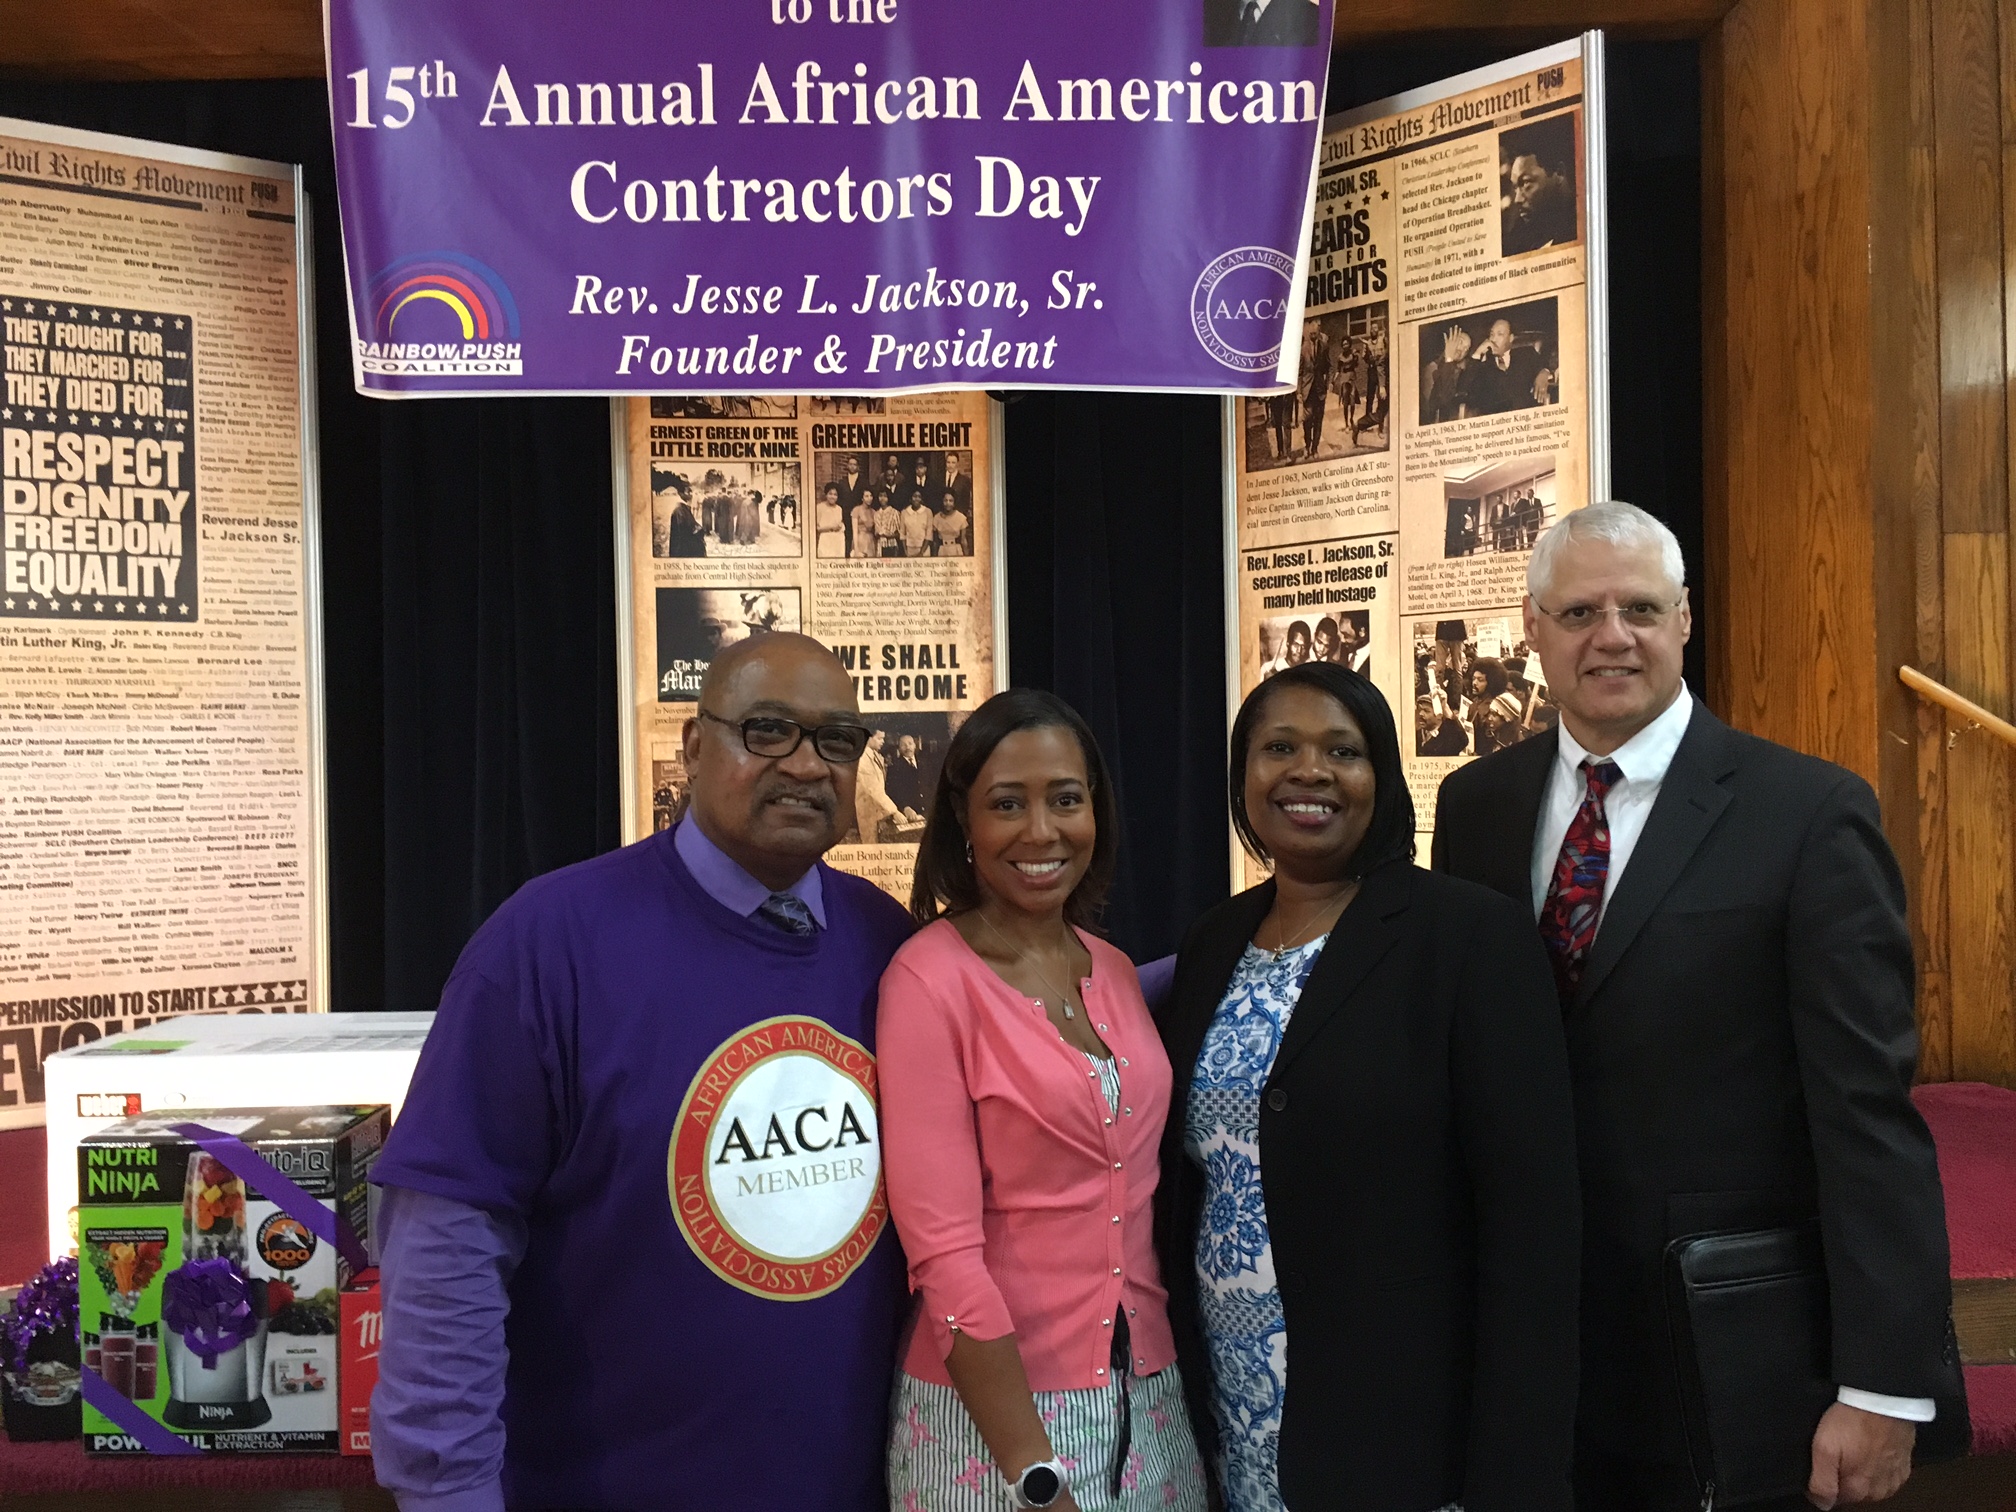 Committeeman Pedersen at the 15th Annual African American Contractors Day